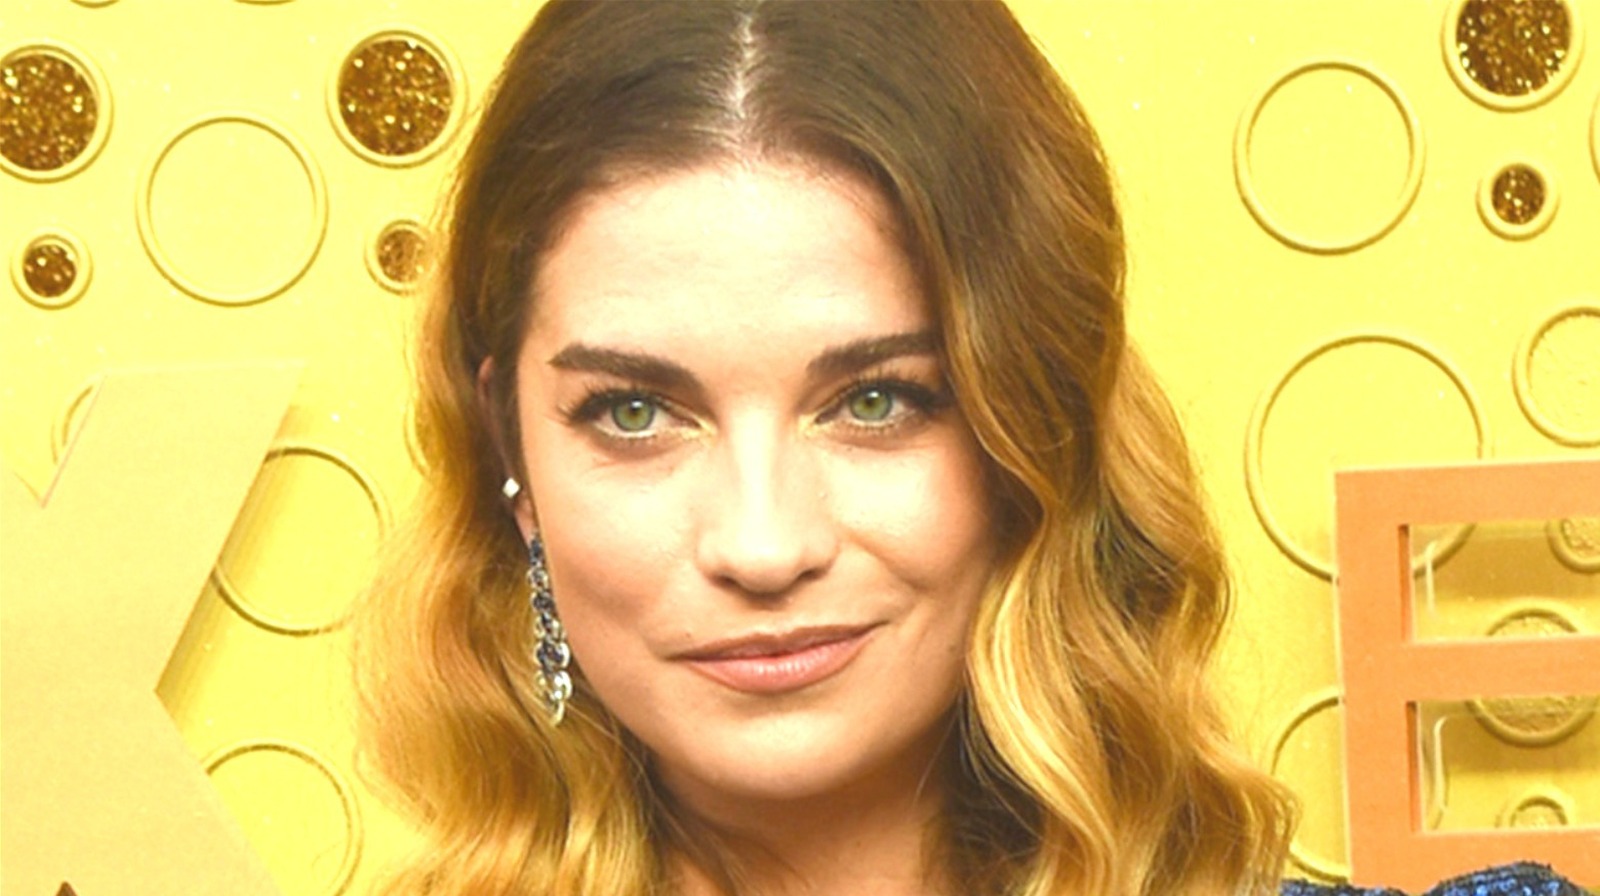 Schitt's Creek' actor Annie Murphy bags role in 'Witness Protection